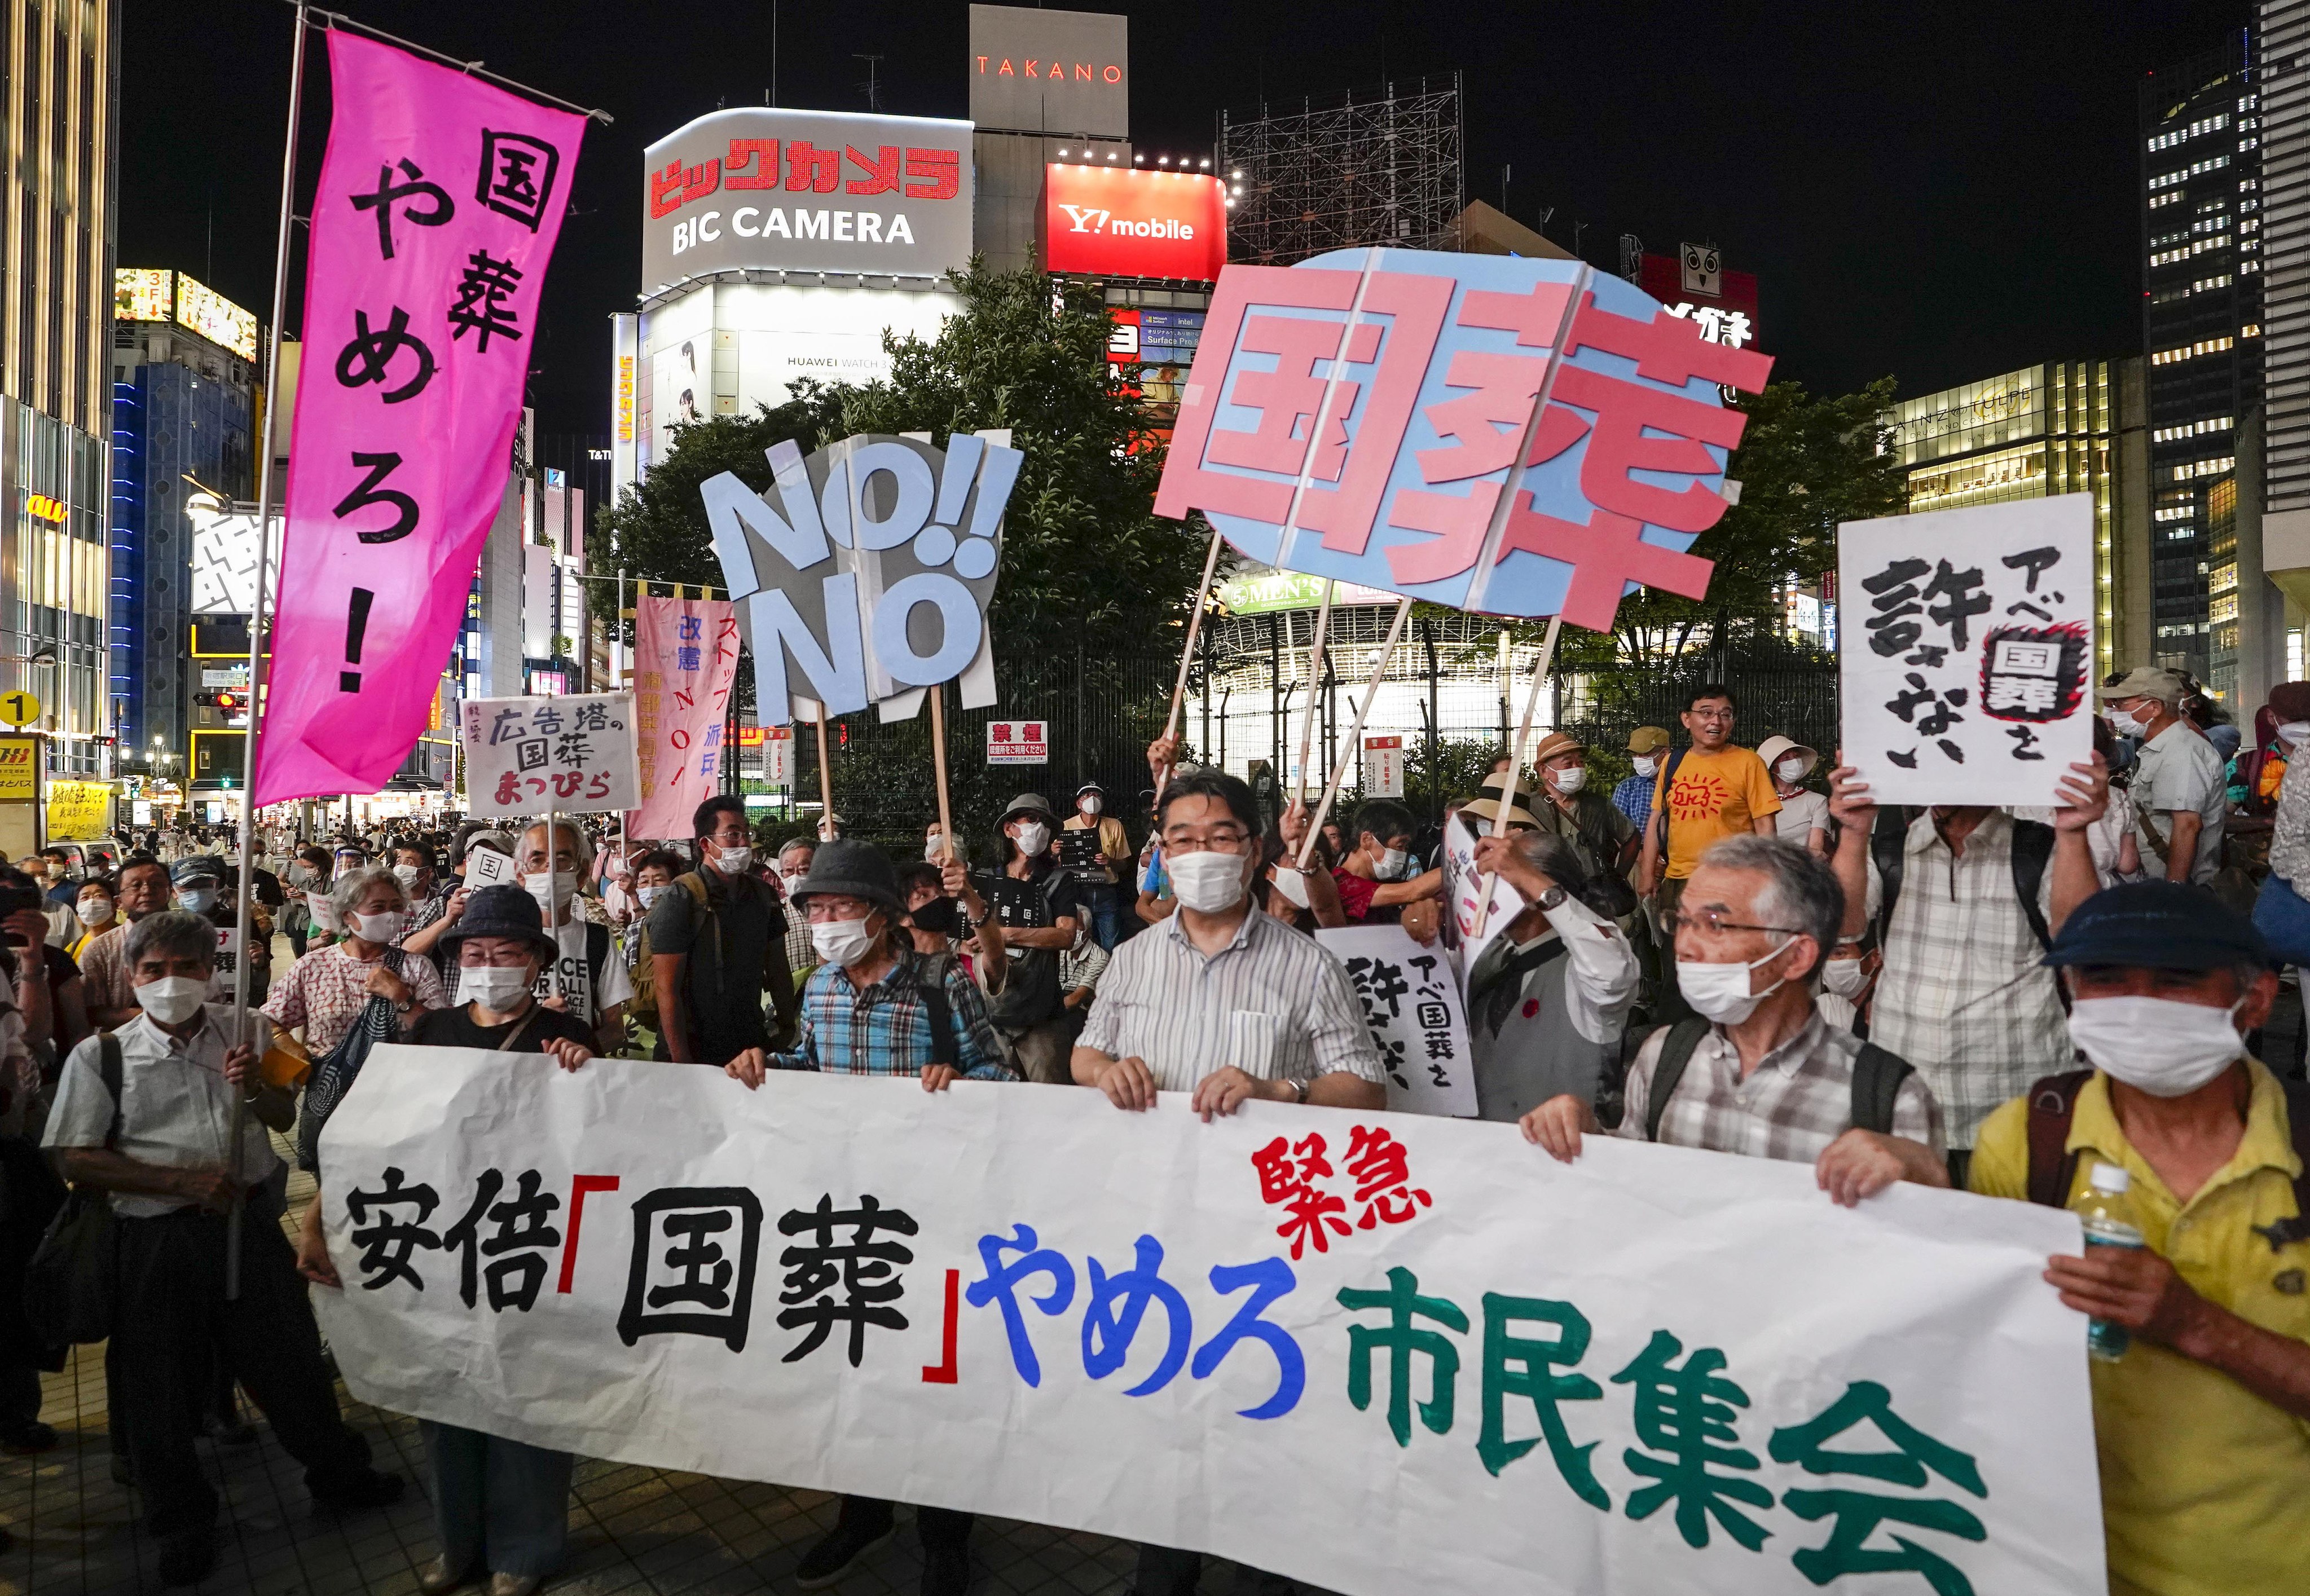 In August there were protests about the state funeral for former Japanese prime minister Shinzo Abe, who was assassinated on July 8. Photo: EPA-EFE